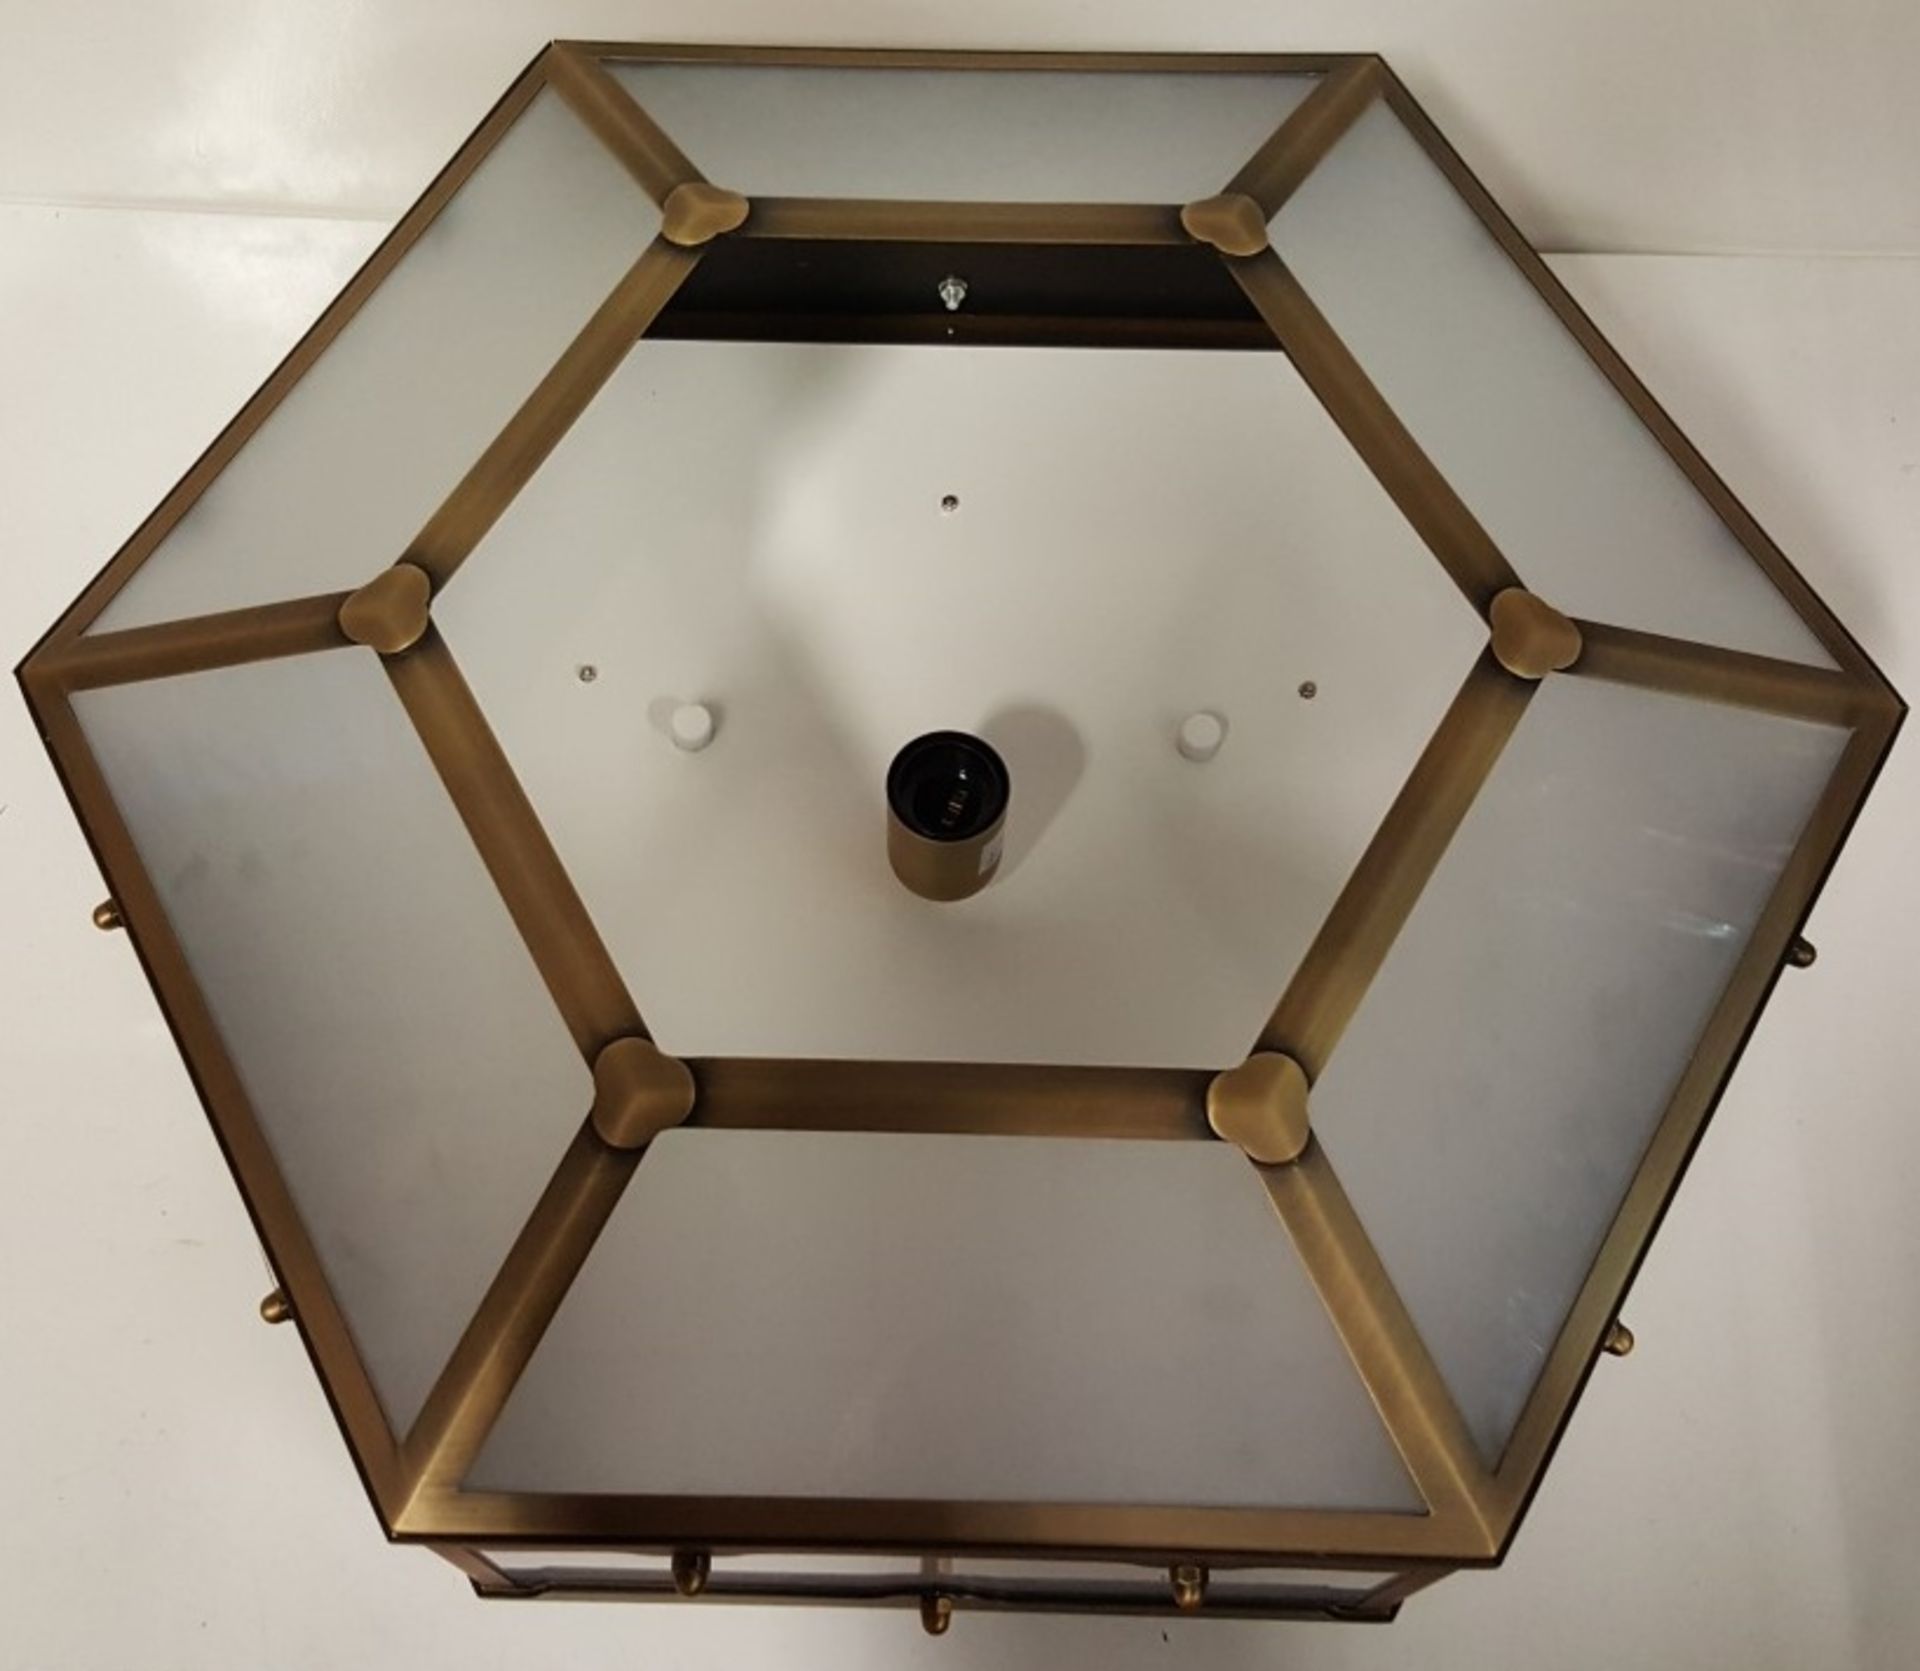 1 x Chelsom Flush Fitting Hexagonal Shaped Light Fitting In A Antique Brass Finish - REF714 - Image 3 of 6